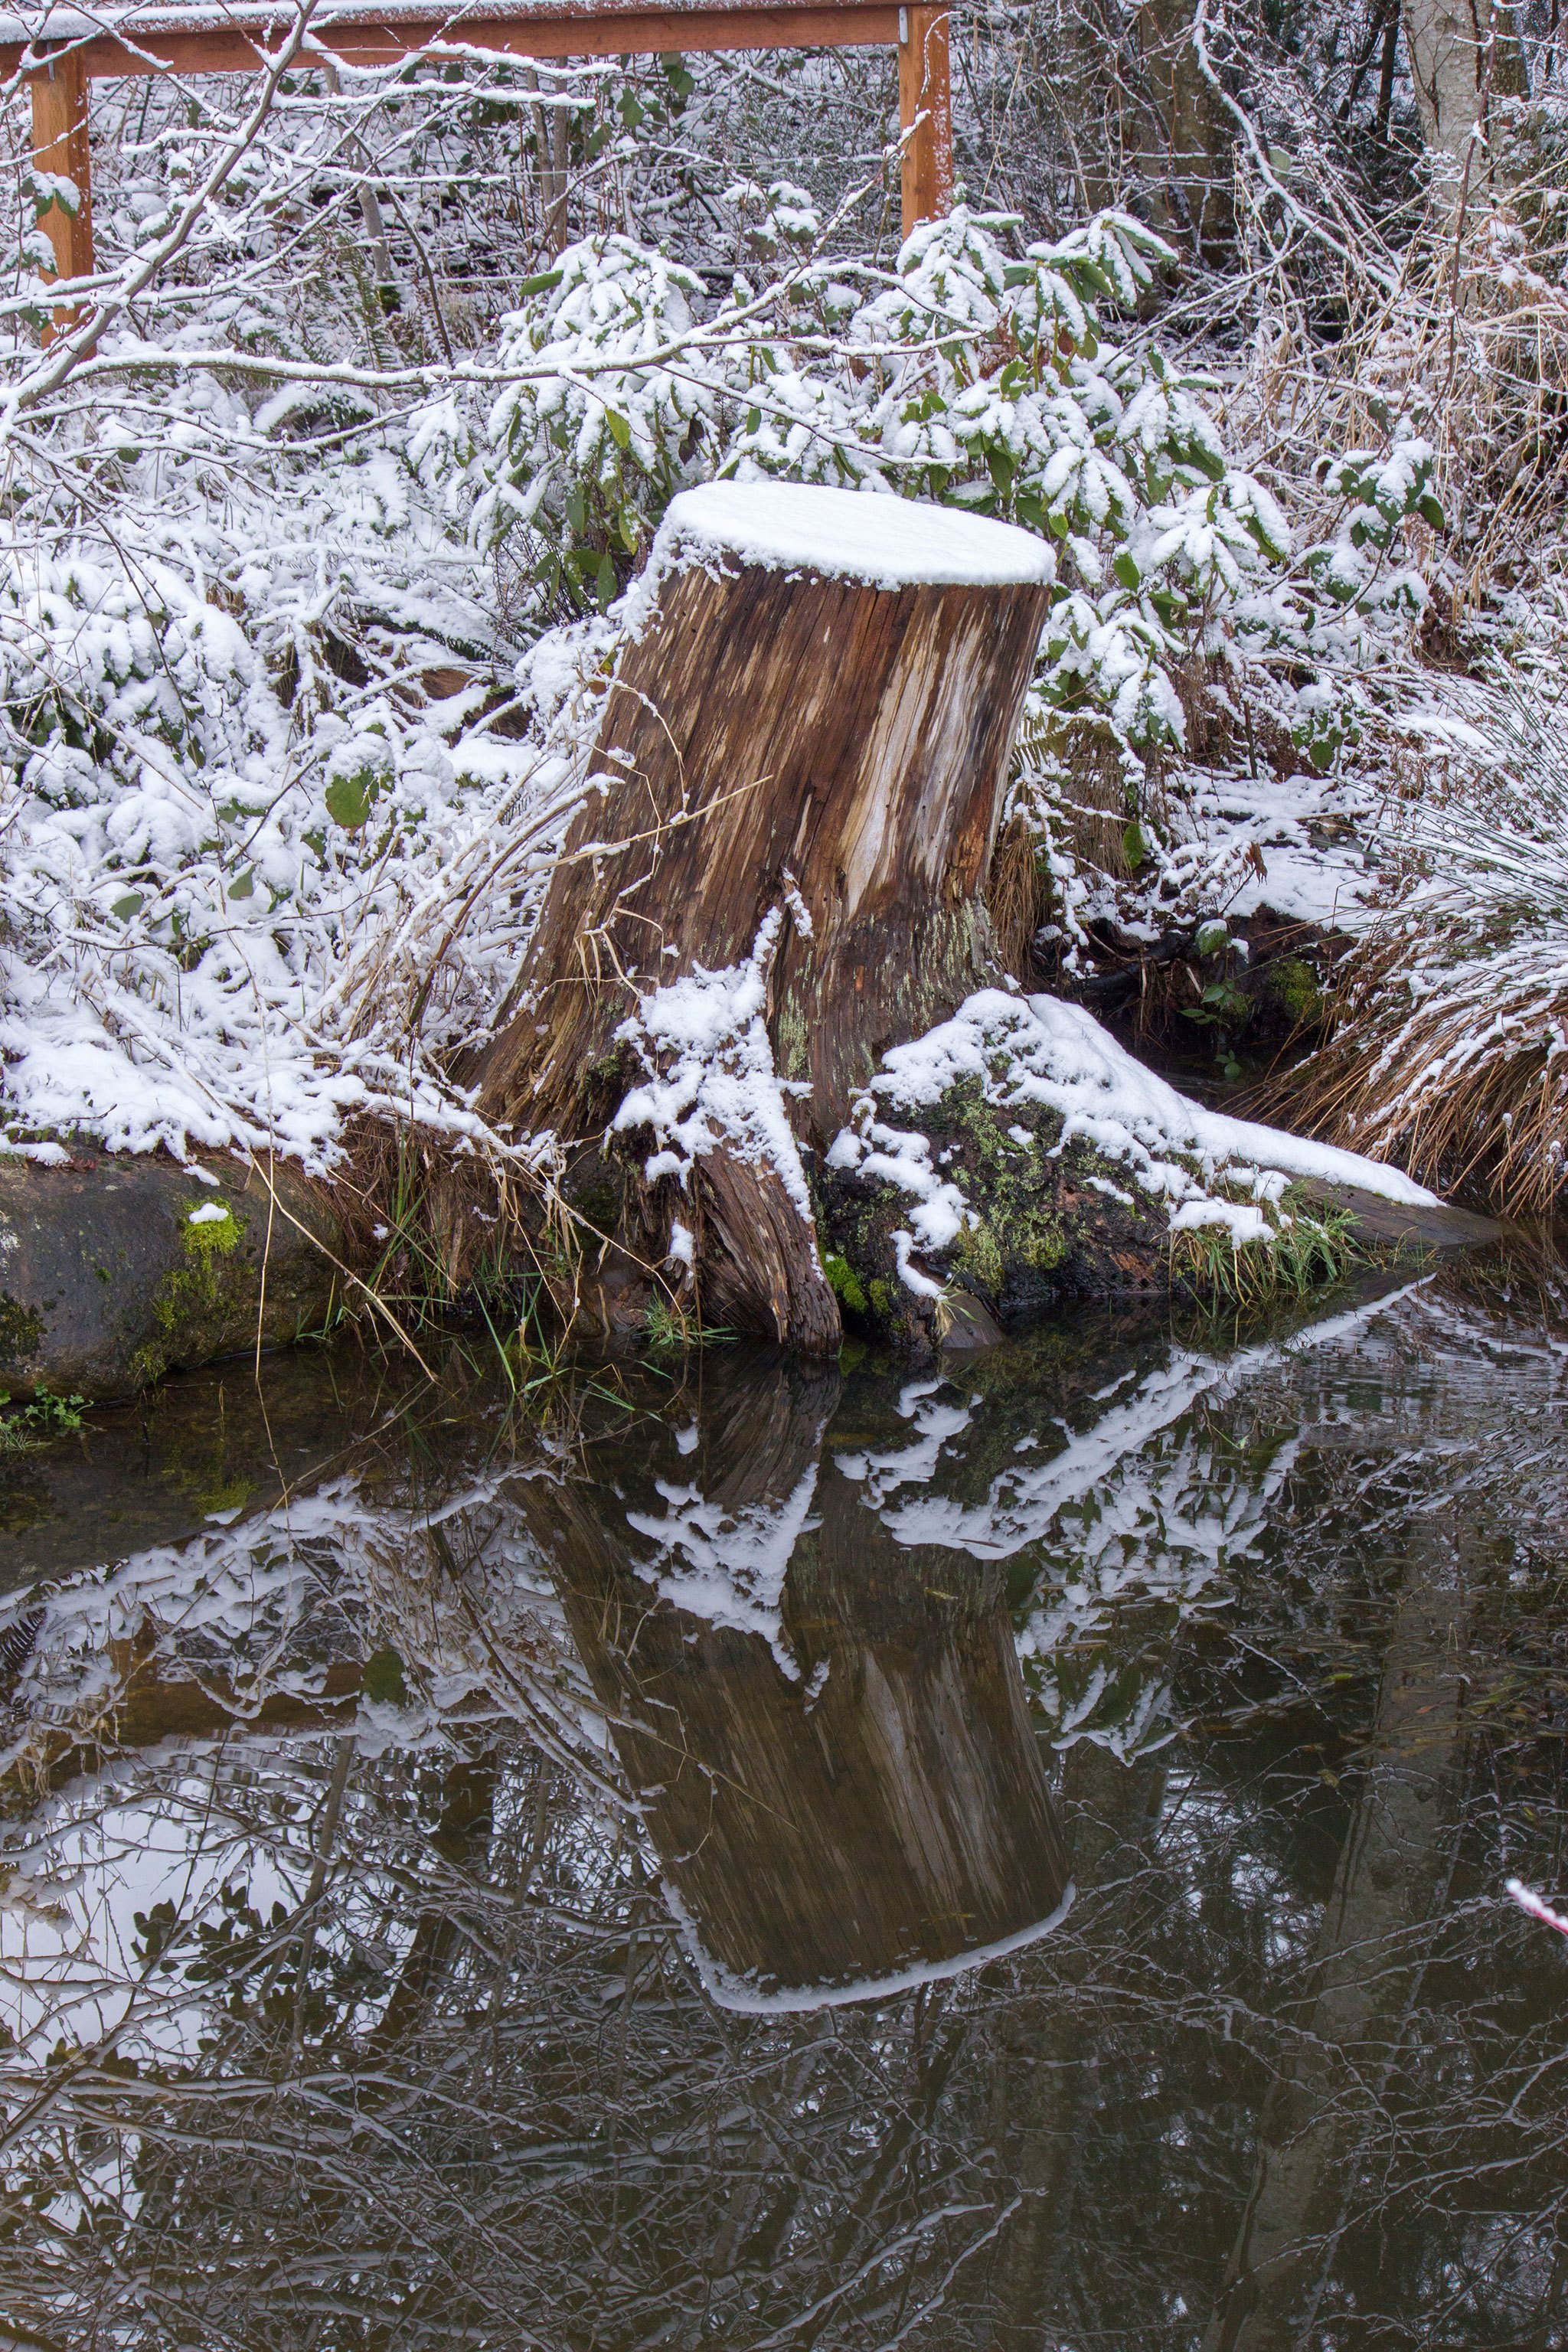 A snow-covered tree stump is reflected in the water at Fish Park Feb. 6. (Sophie Bonomi / Kitsap Daily News)